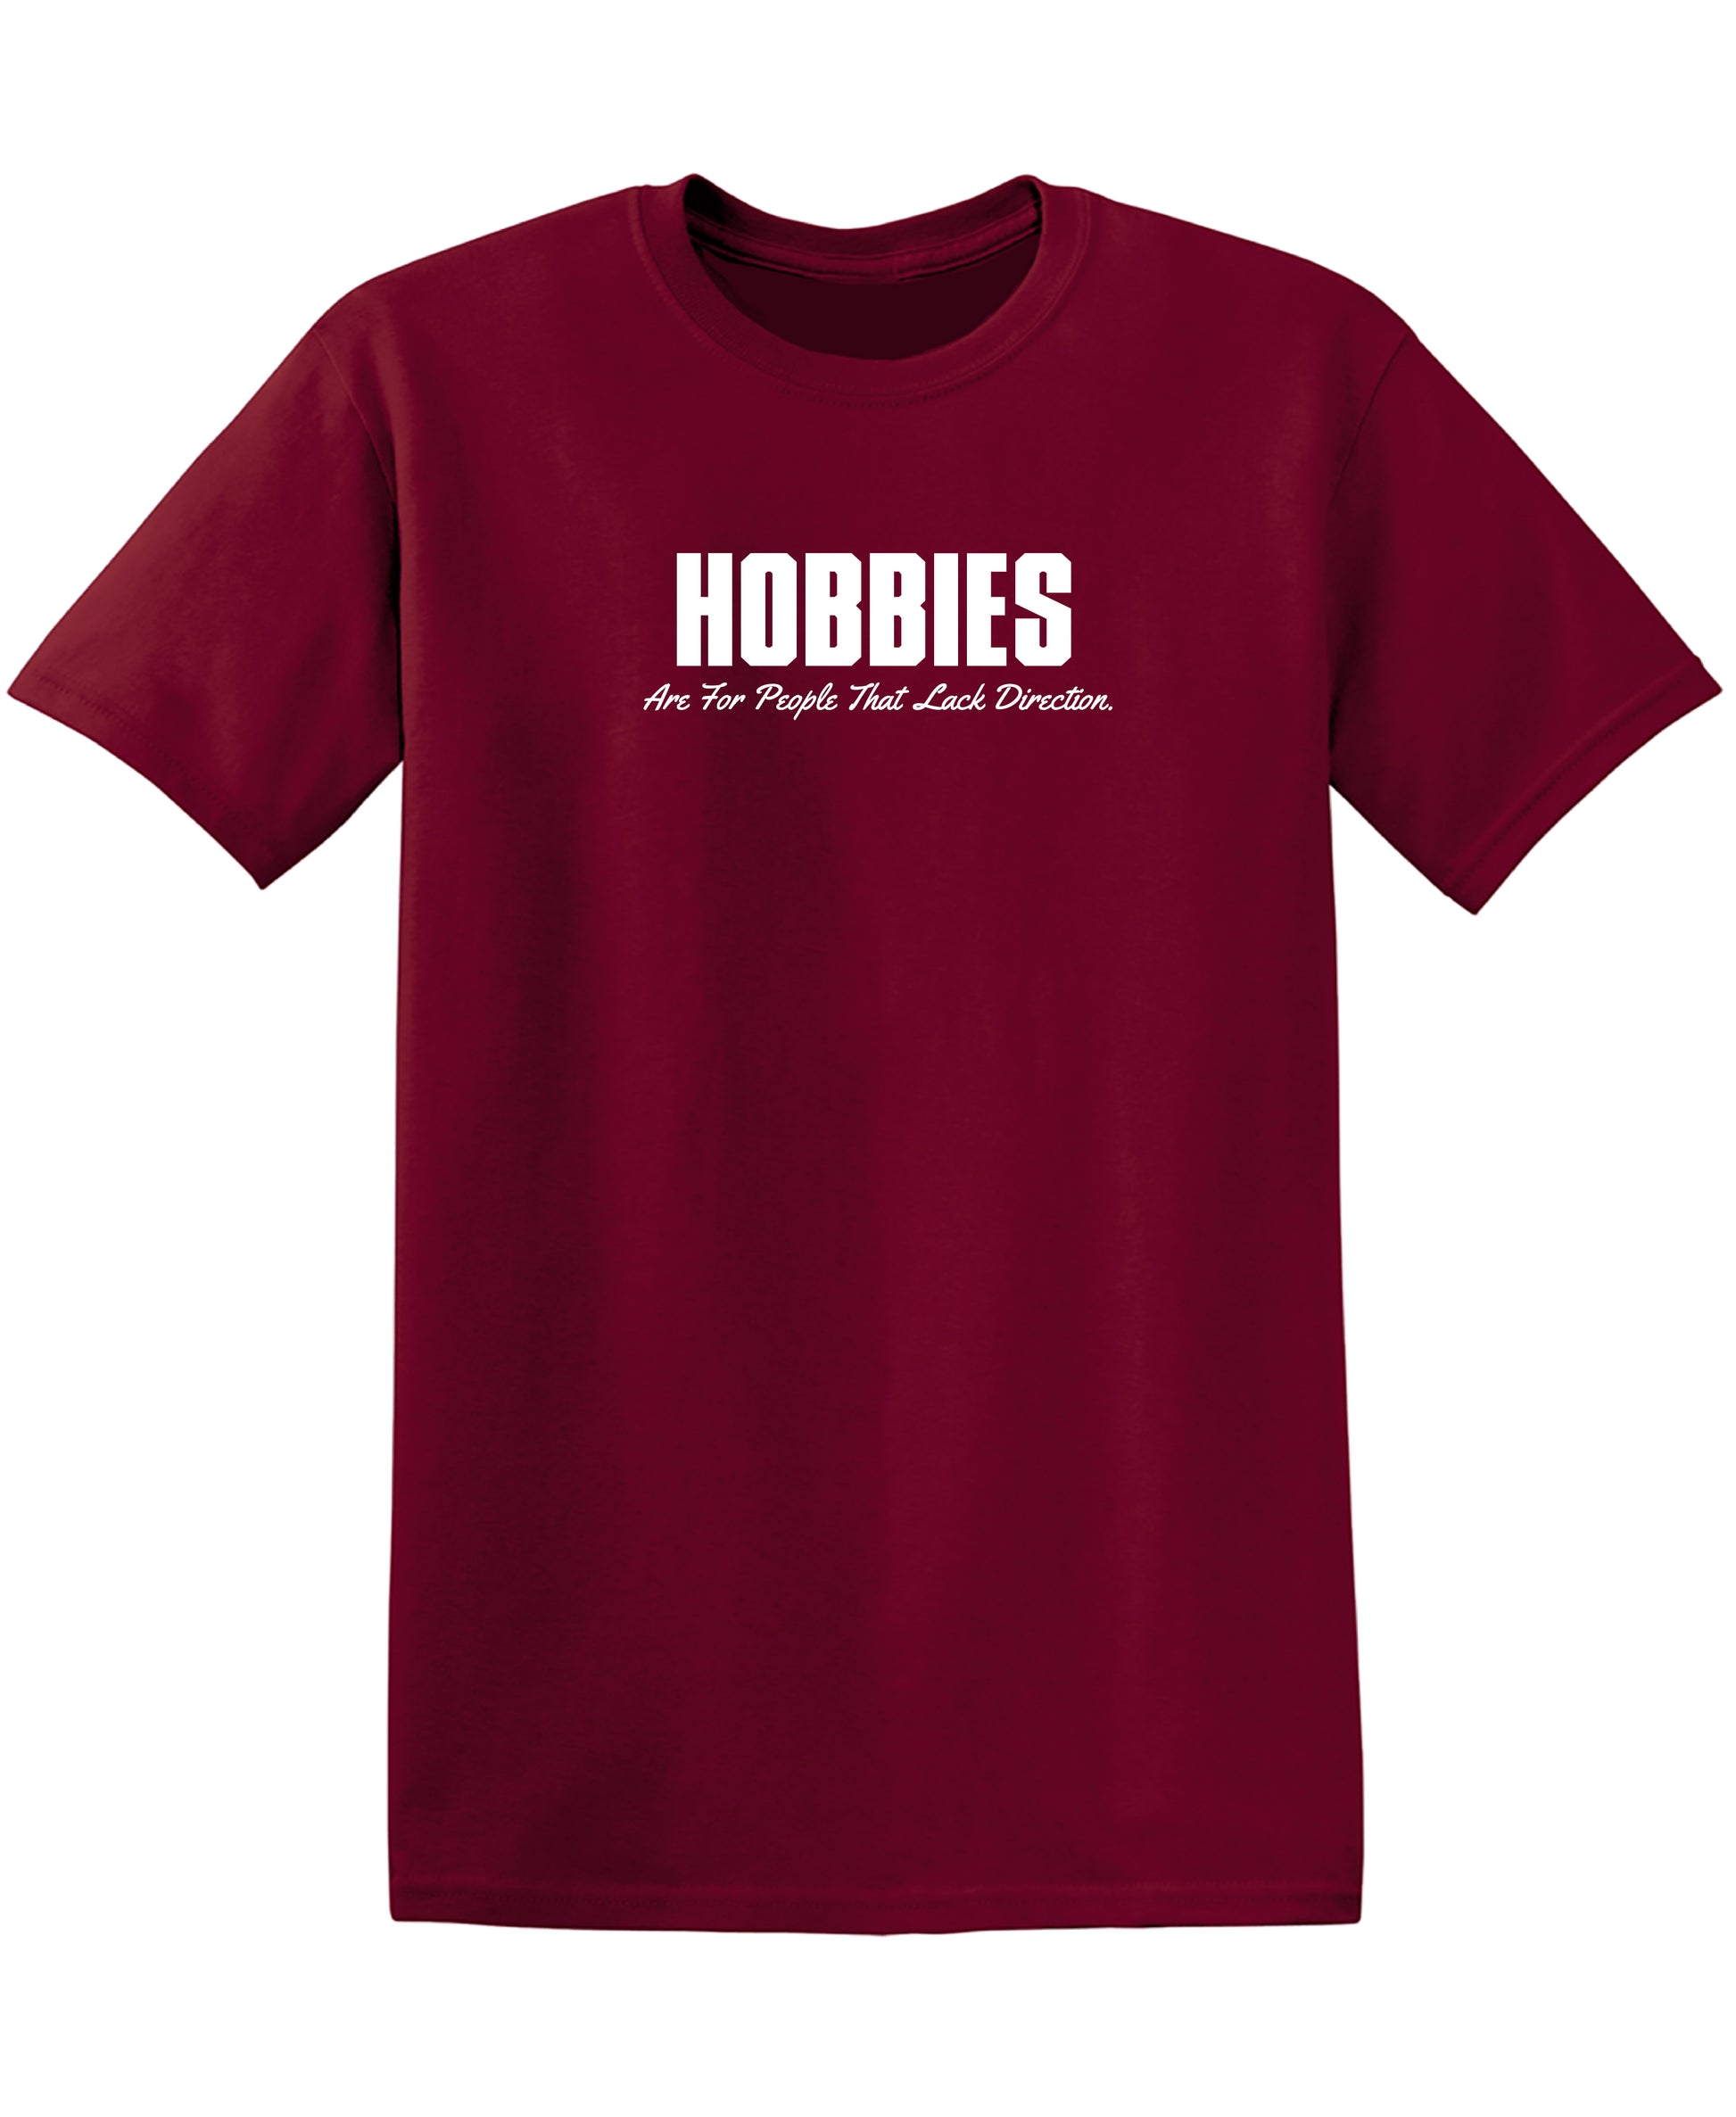 Hobbies Are For People That Lack Direction. - Funny T Shirts & Graphic Tees